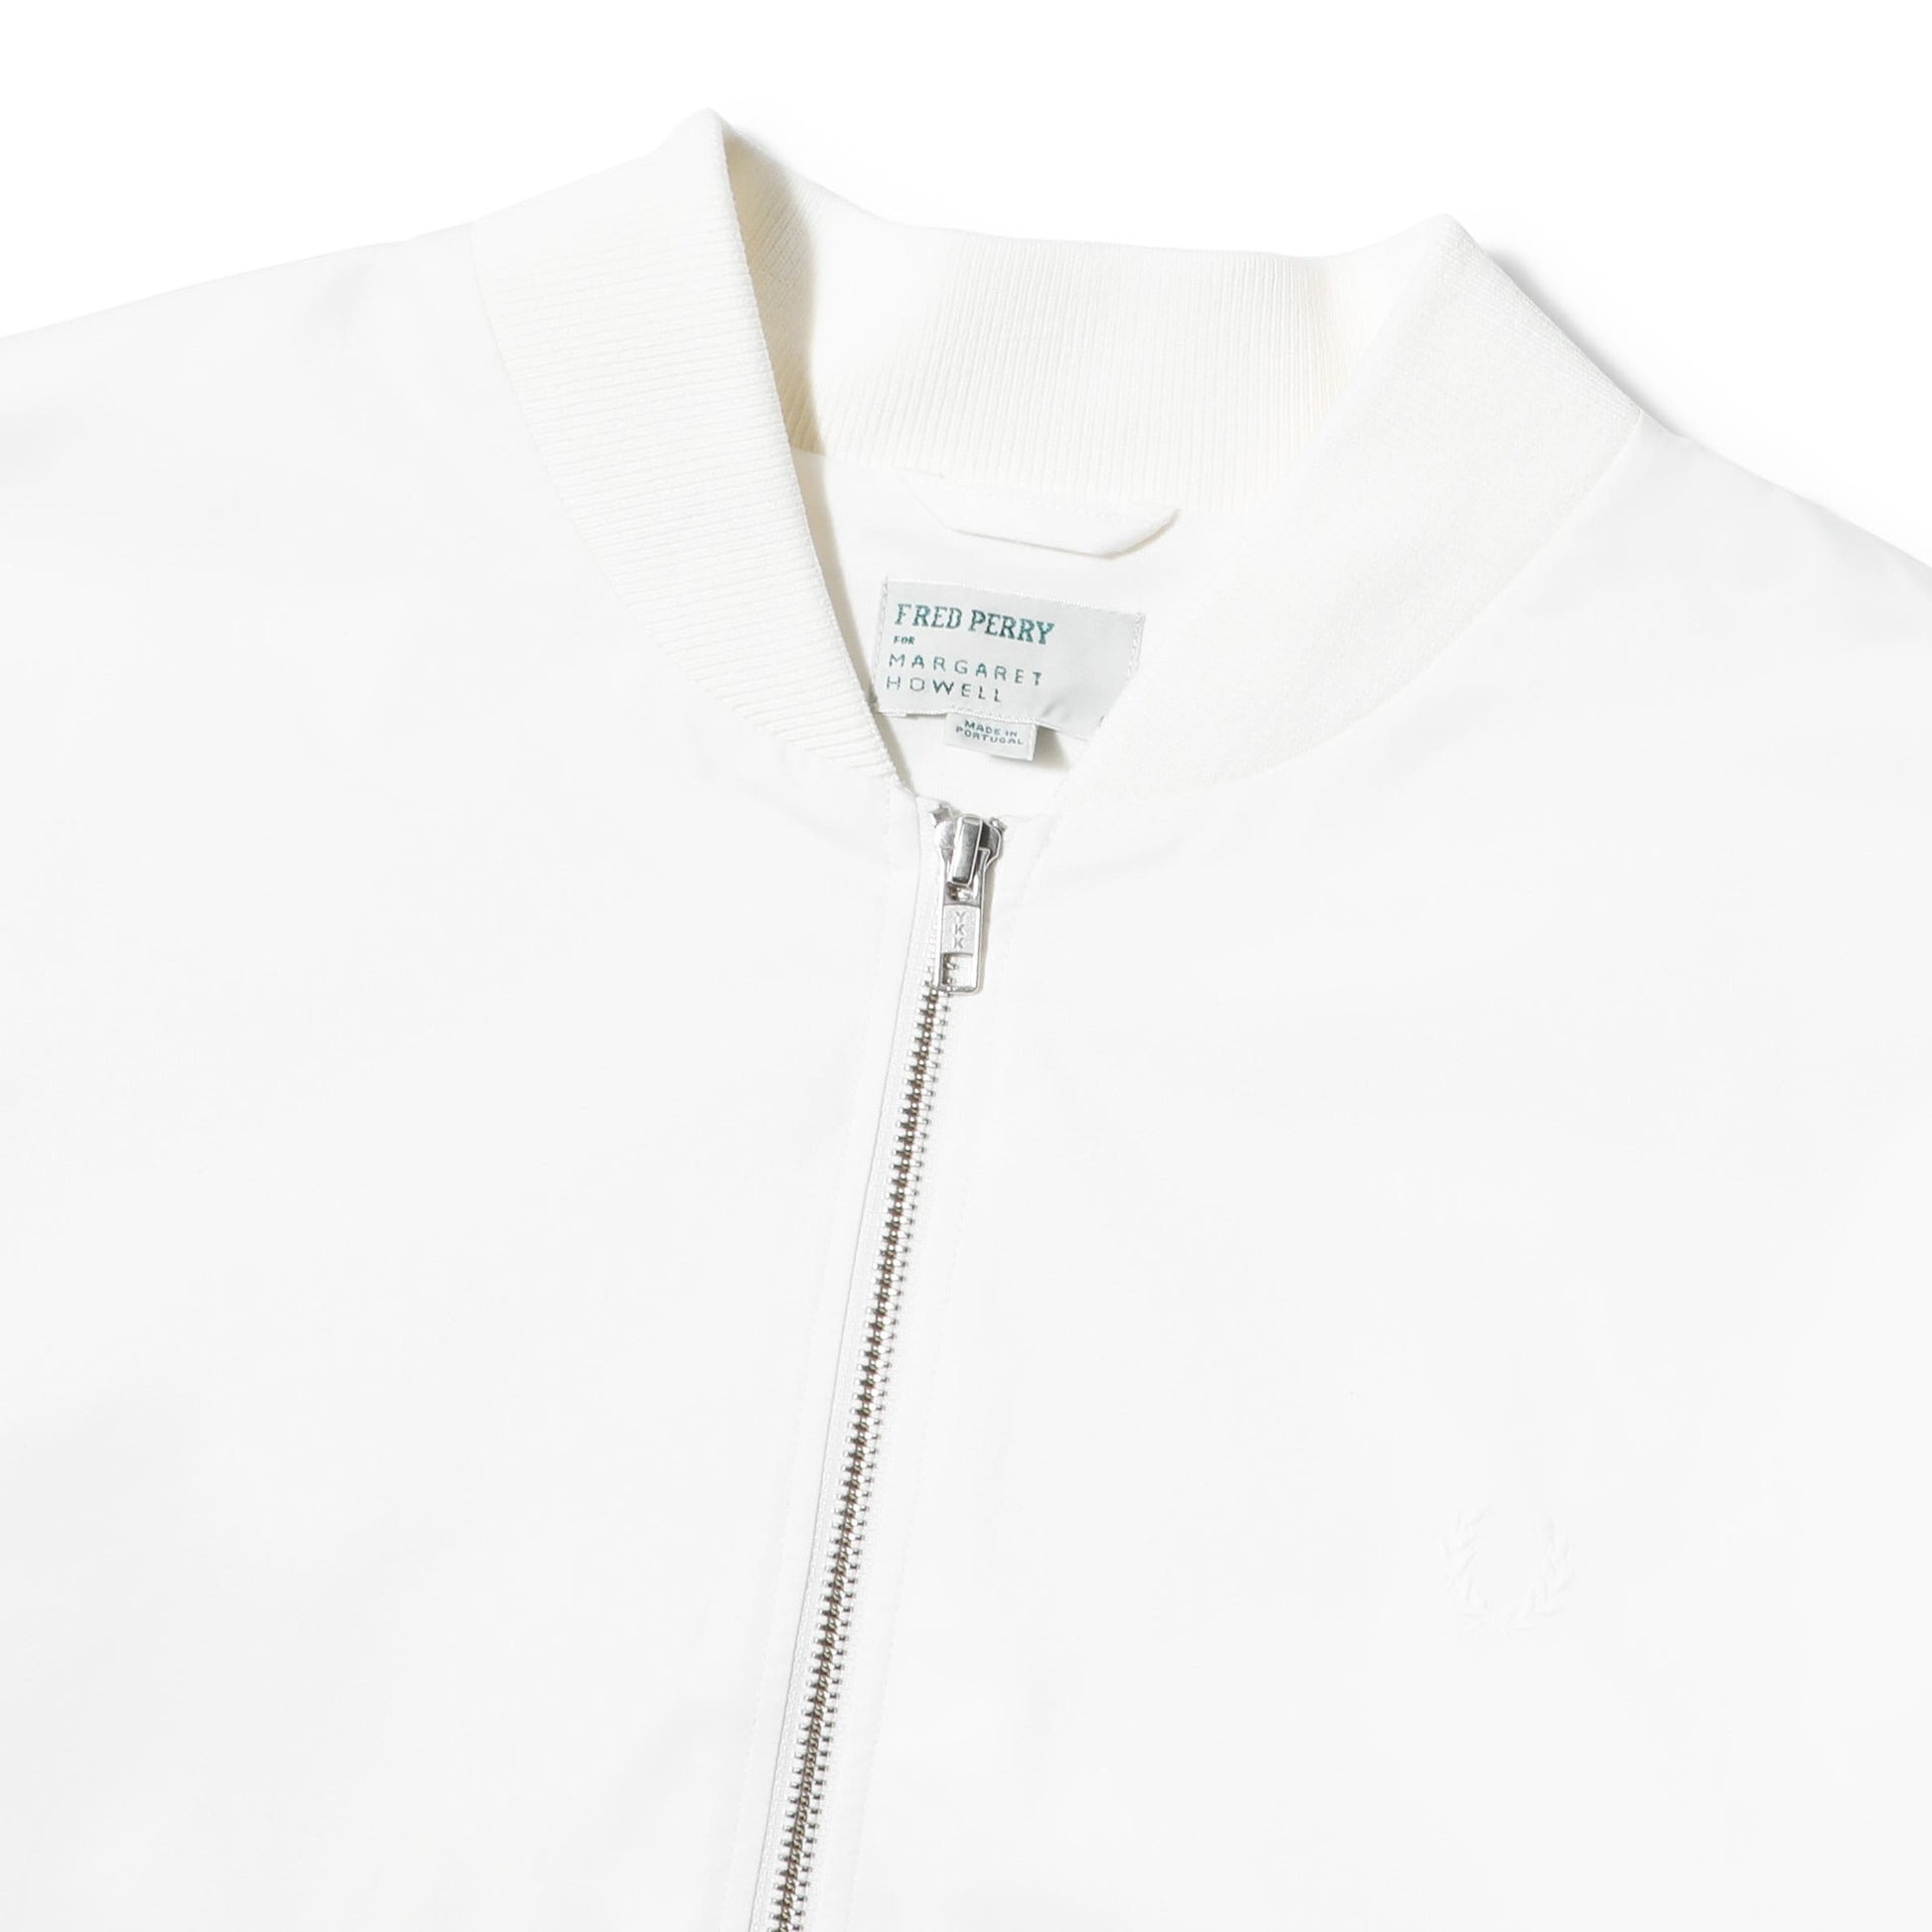 Fred Perry Outerwear x MARGARET HOWELL TENNIS BOMBER